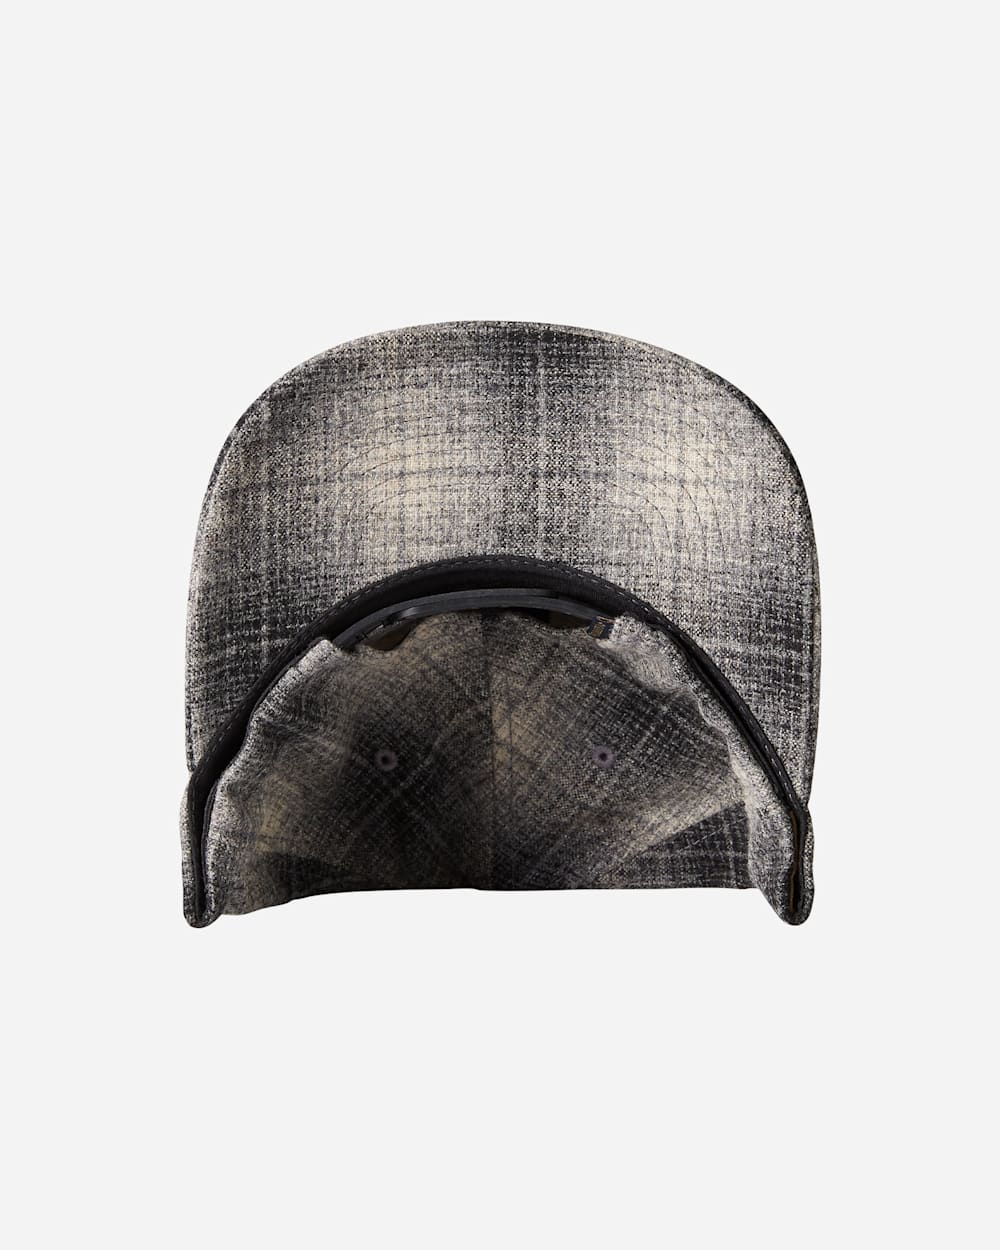 ALTERNATE VIEW OF WOOL HAT IN GREY/BLACK OMBRE image number 2